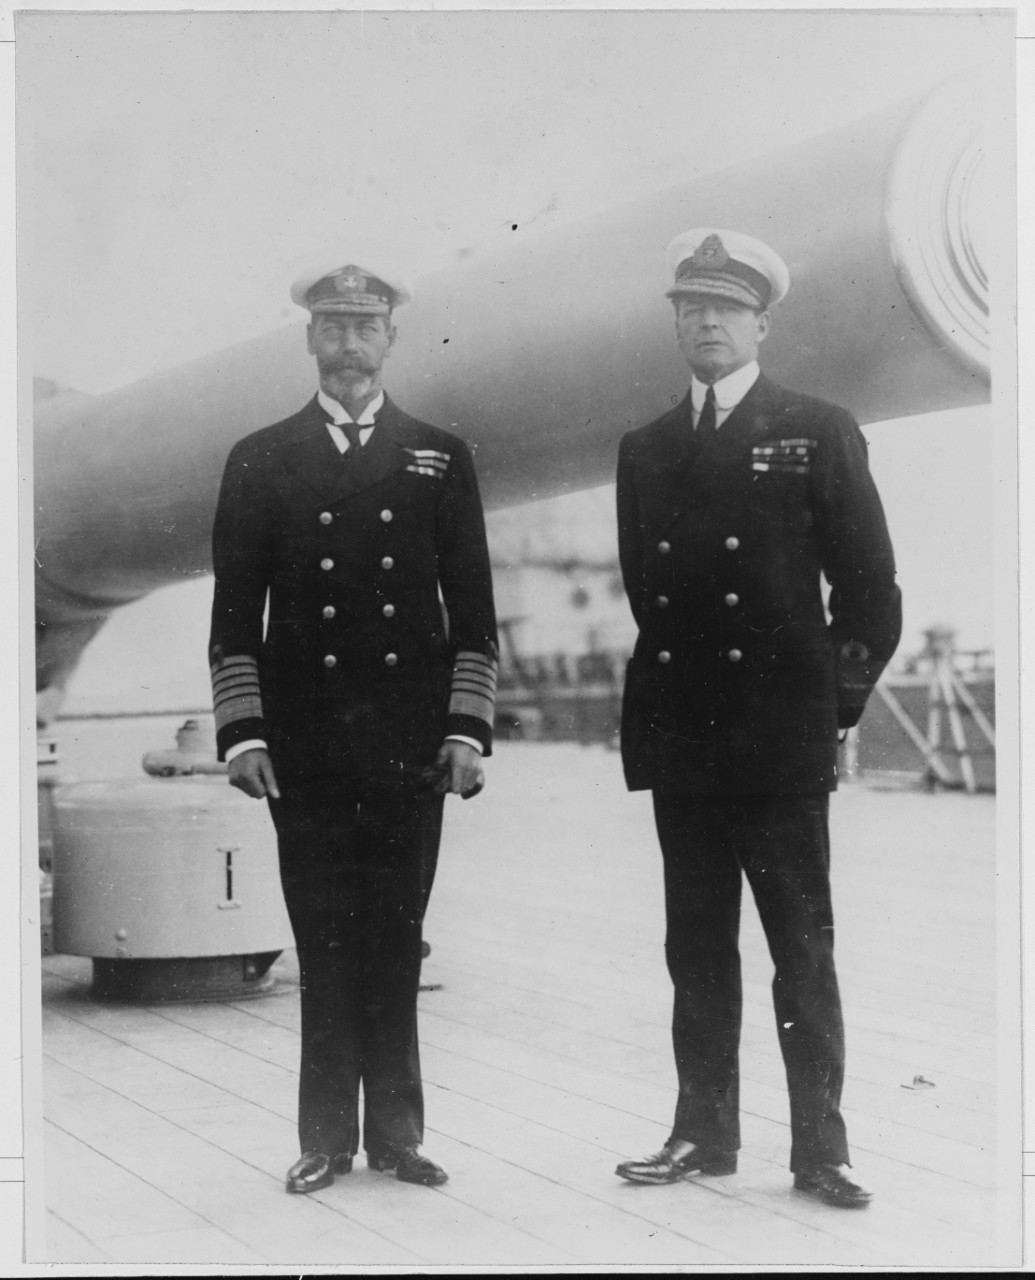 The King and admiral Beatty C-in-C-at the quarter of HMS Queen Elizabeth.